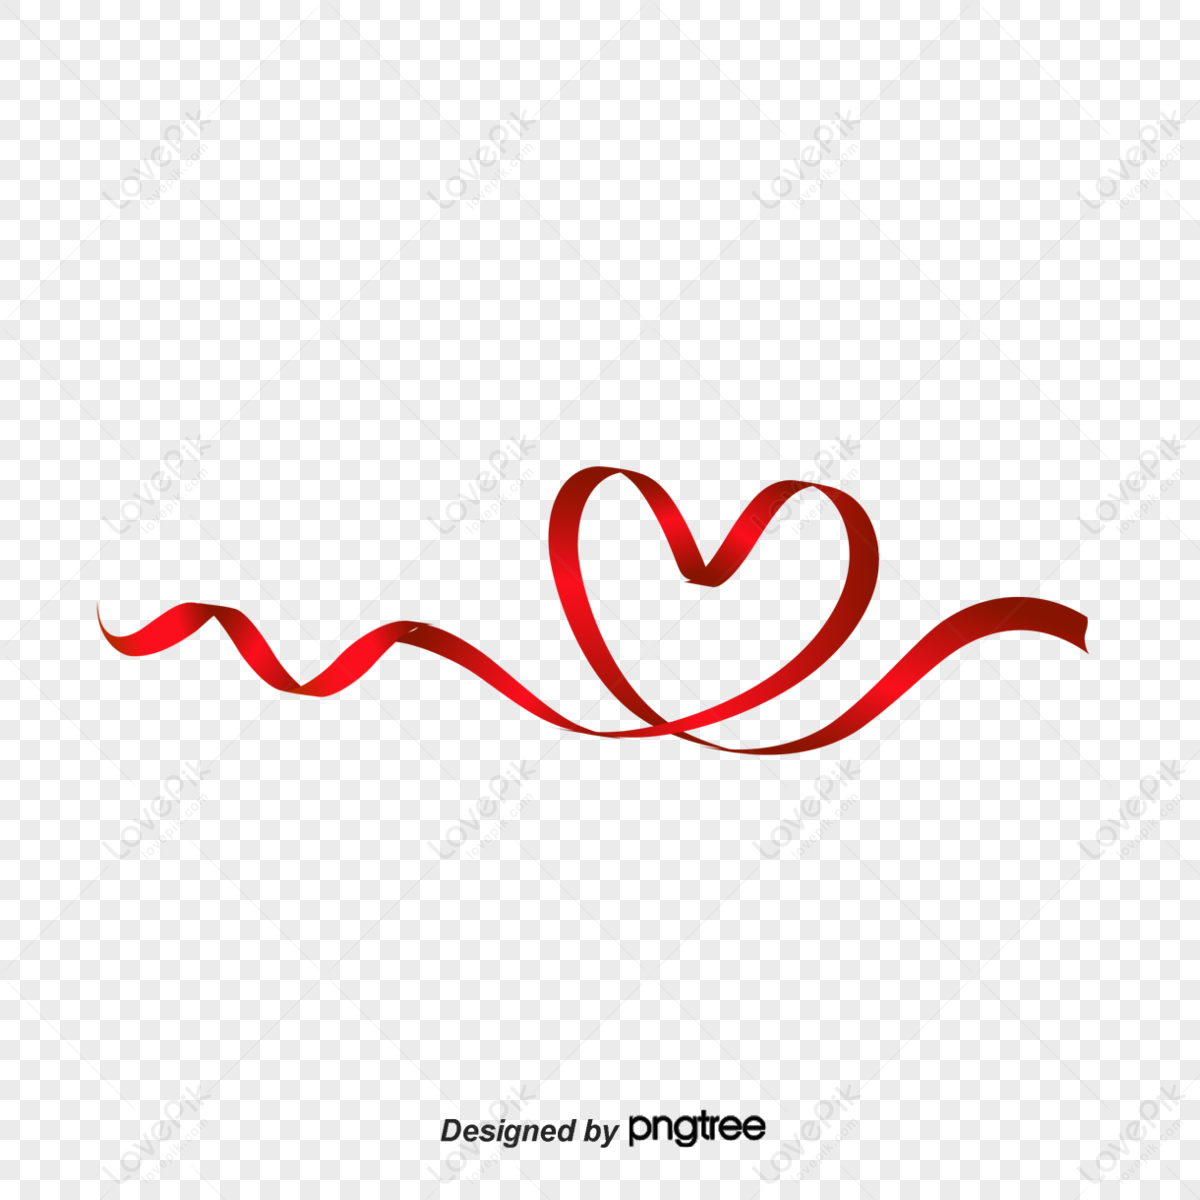 Valentines Day Ribbon png download - 2498*1132 - Free Transparent